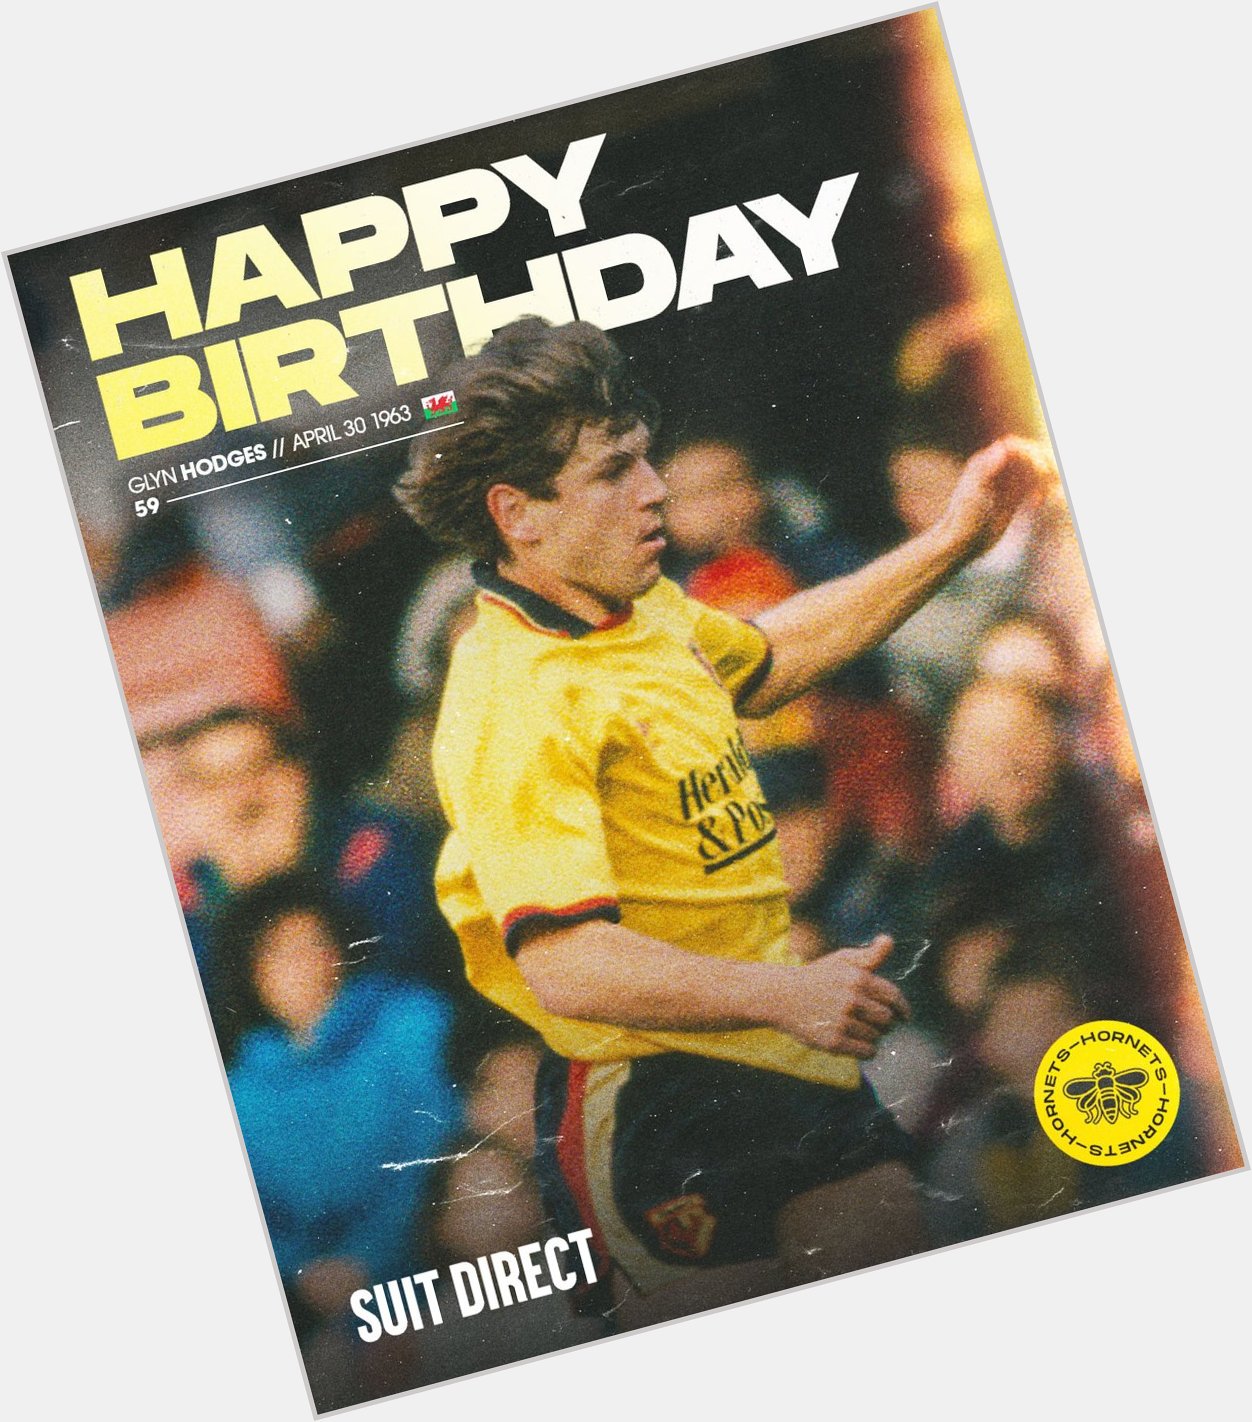 Wishing our 1988/89 Player of the Season Glyn Hodges a happy birthday!  | 